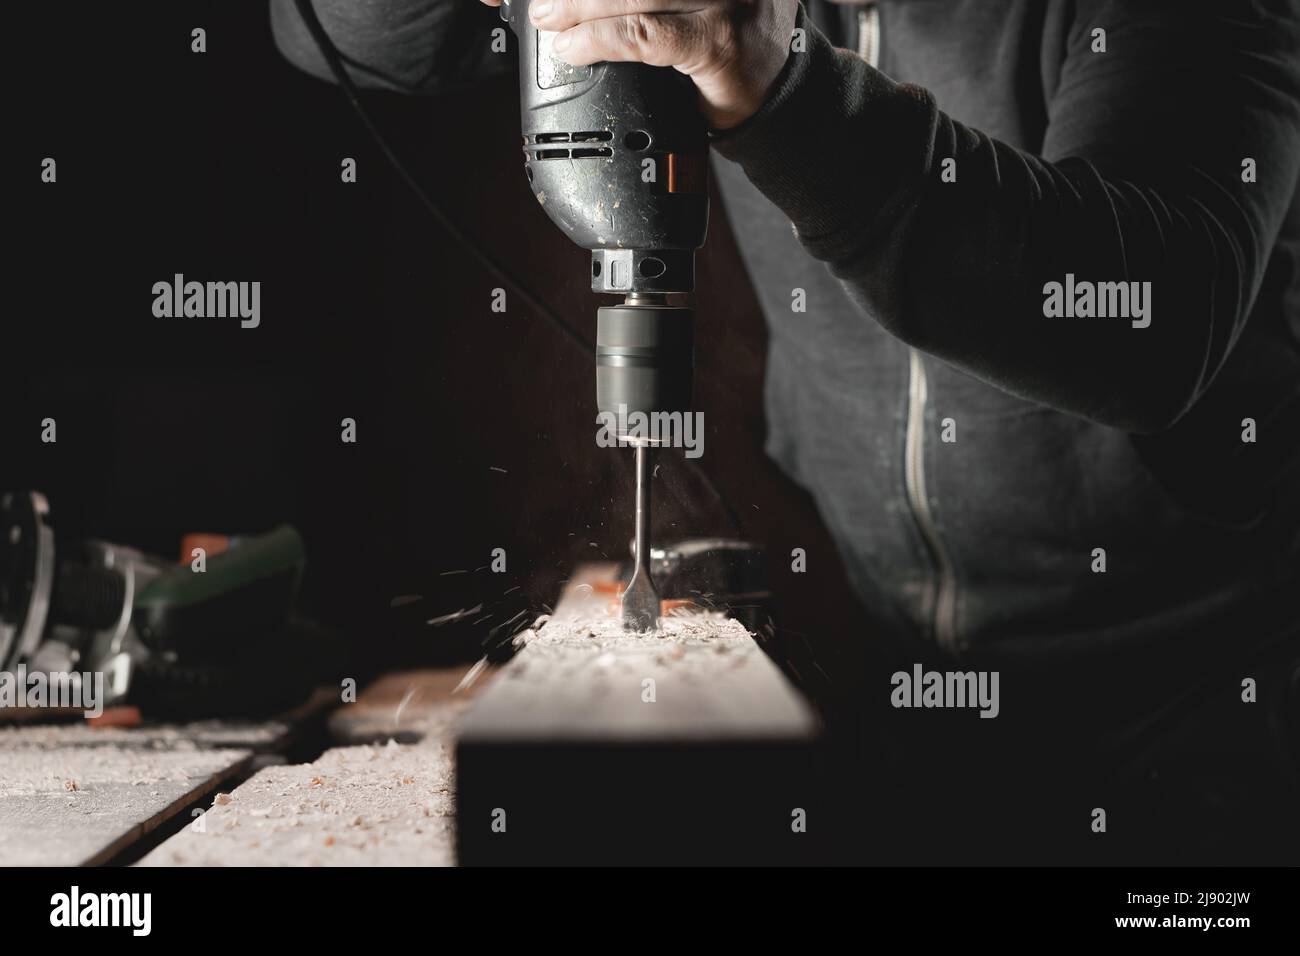 A man works with a drill in his workshop. Carpenter drills with a hand power tool in a dark room with directional light Stock Photo